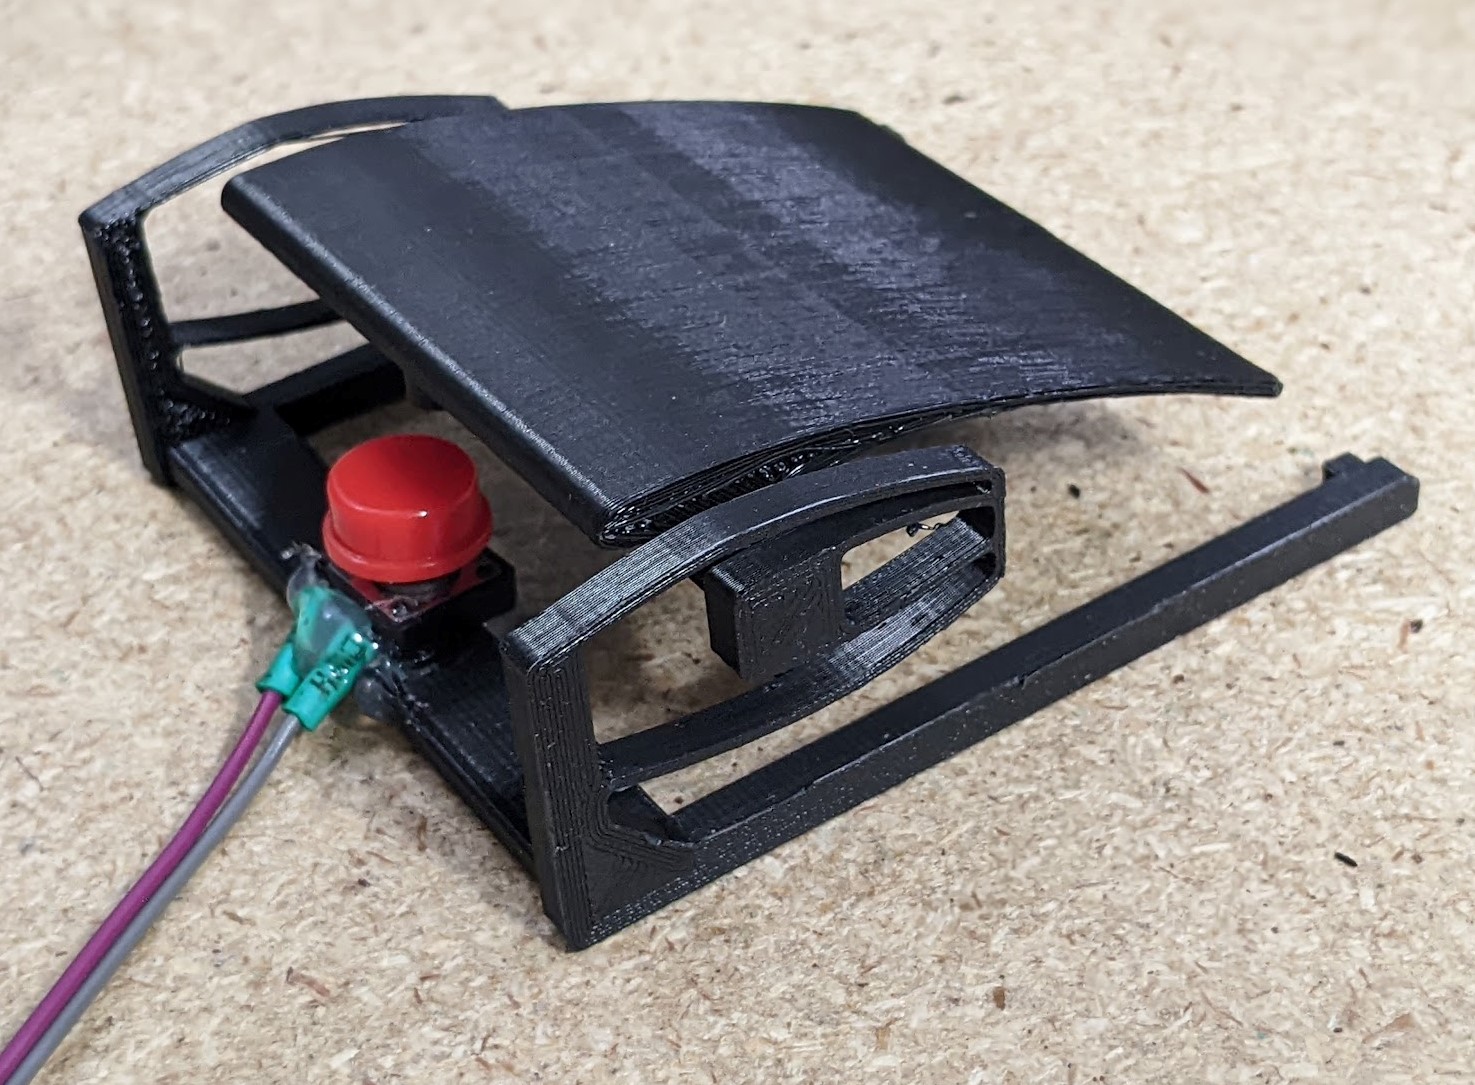 The final printed pedal, with a tactile button hot glued in place.